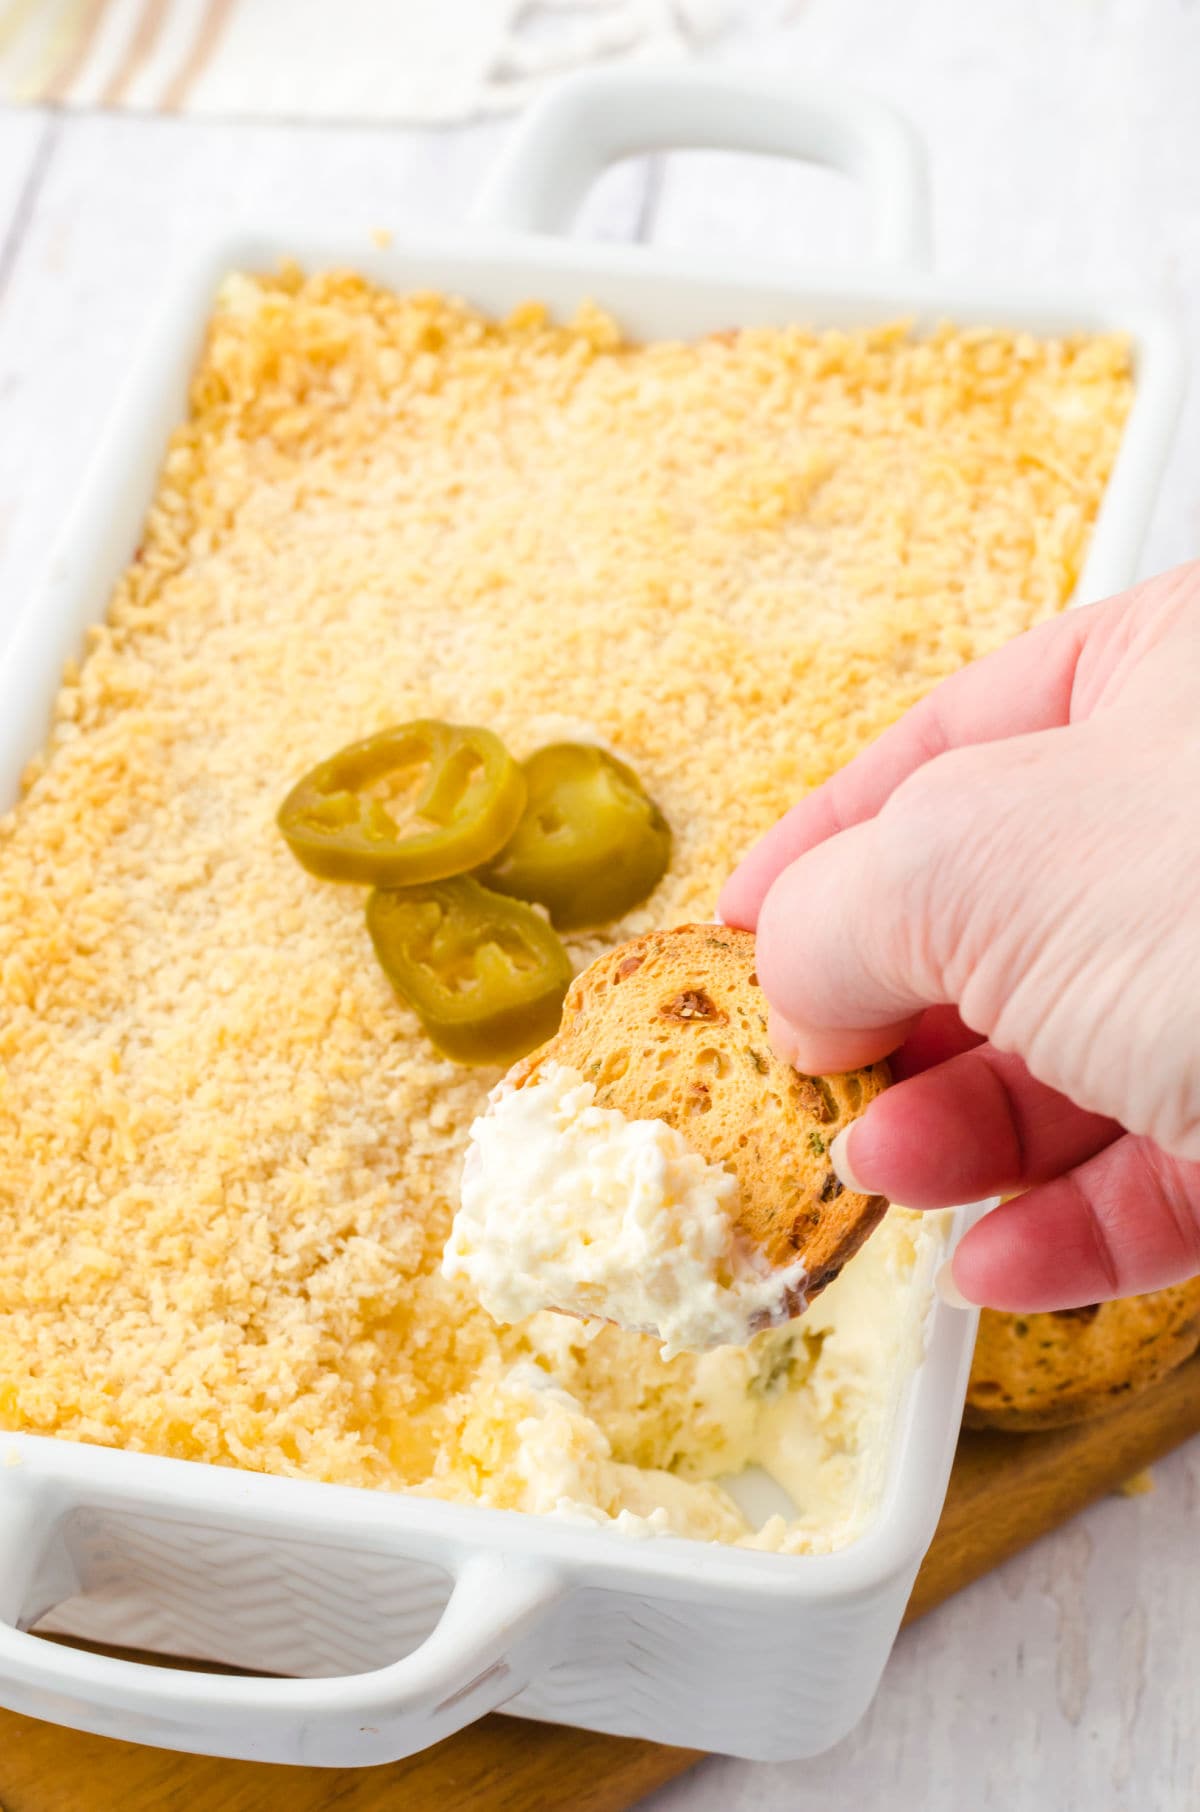 A hand dipping a cracker into the jalapeno popper dip.